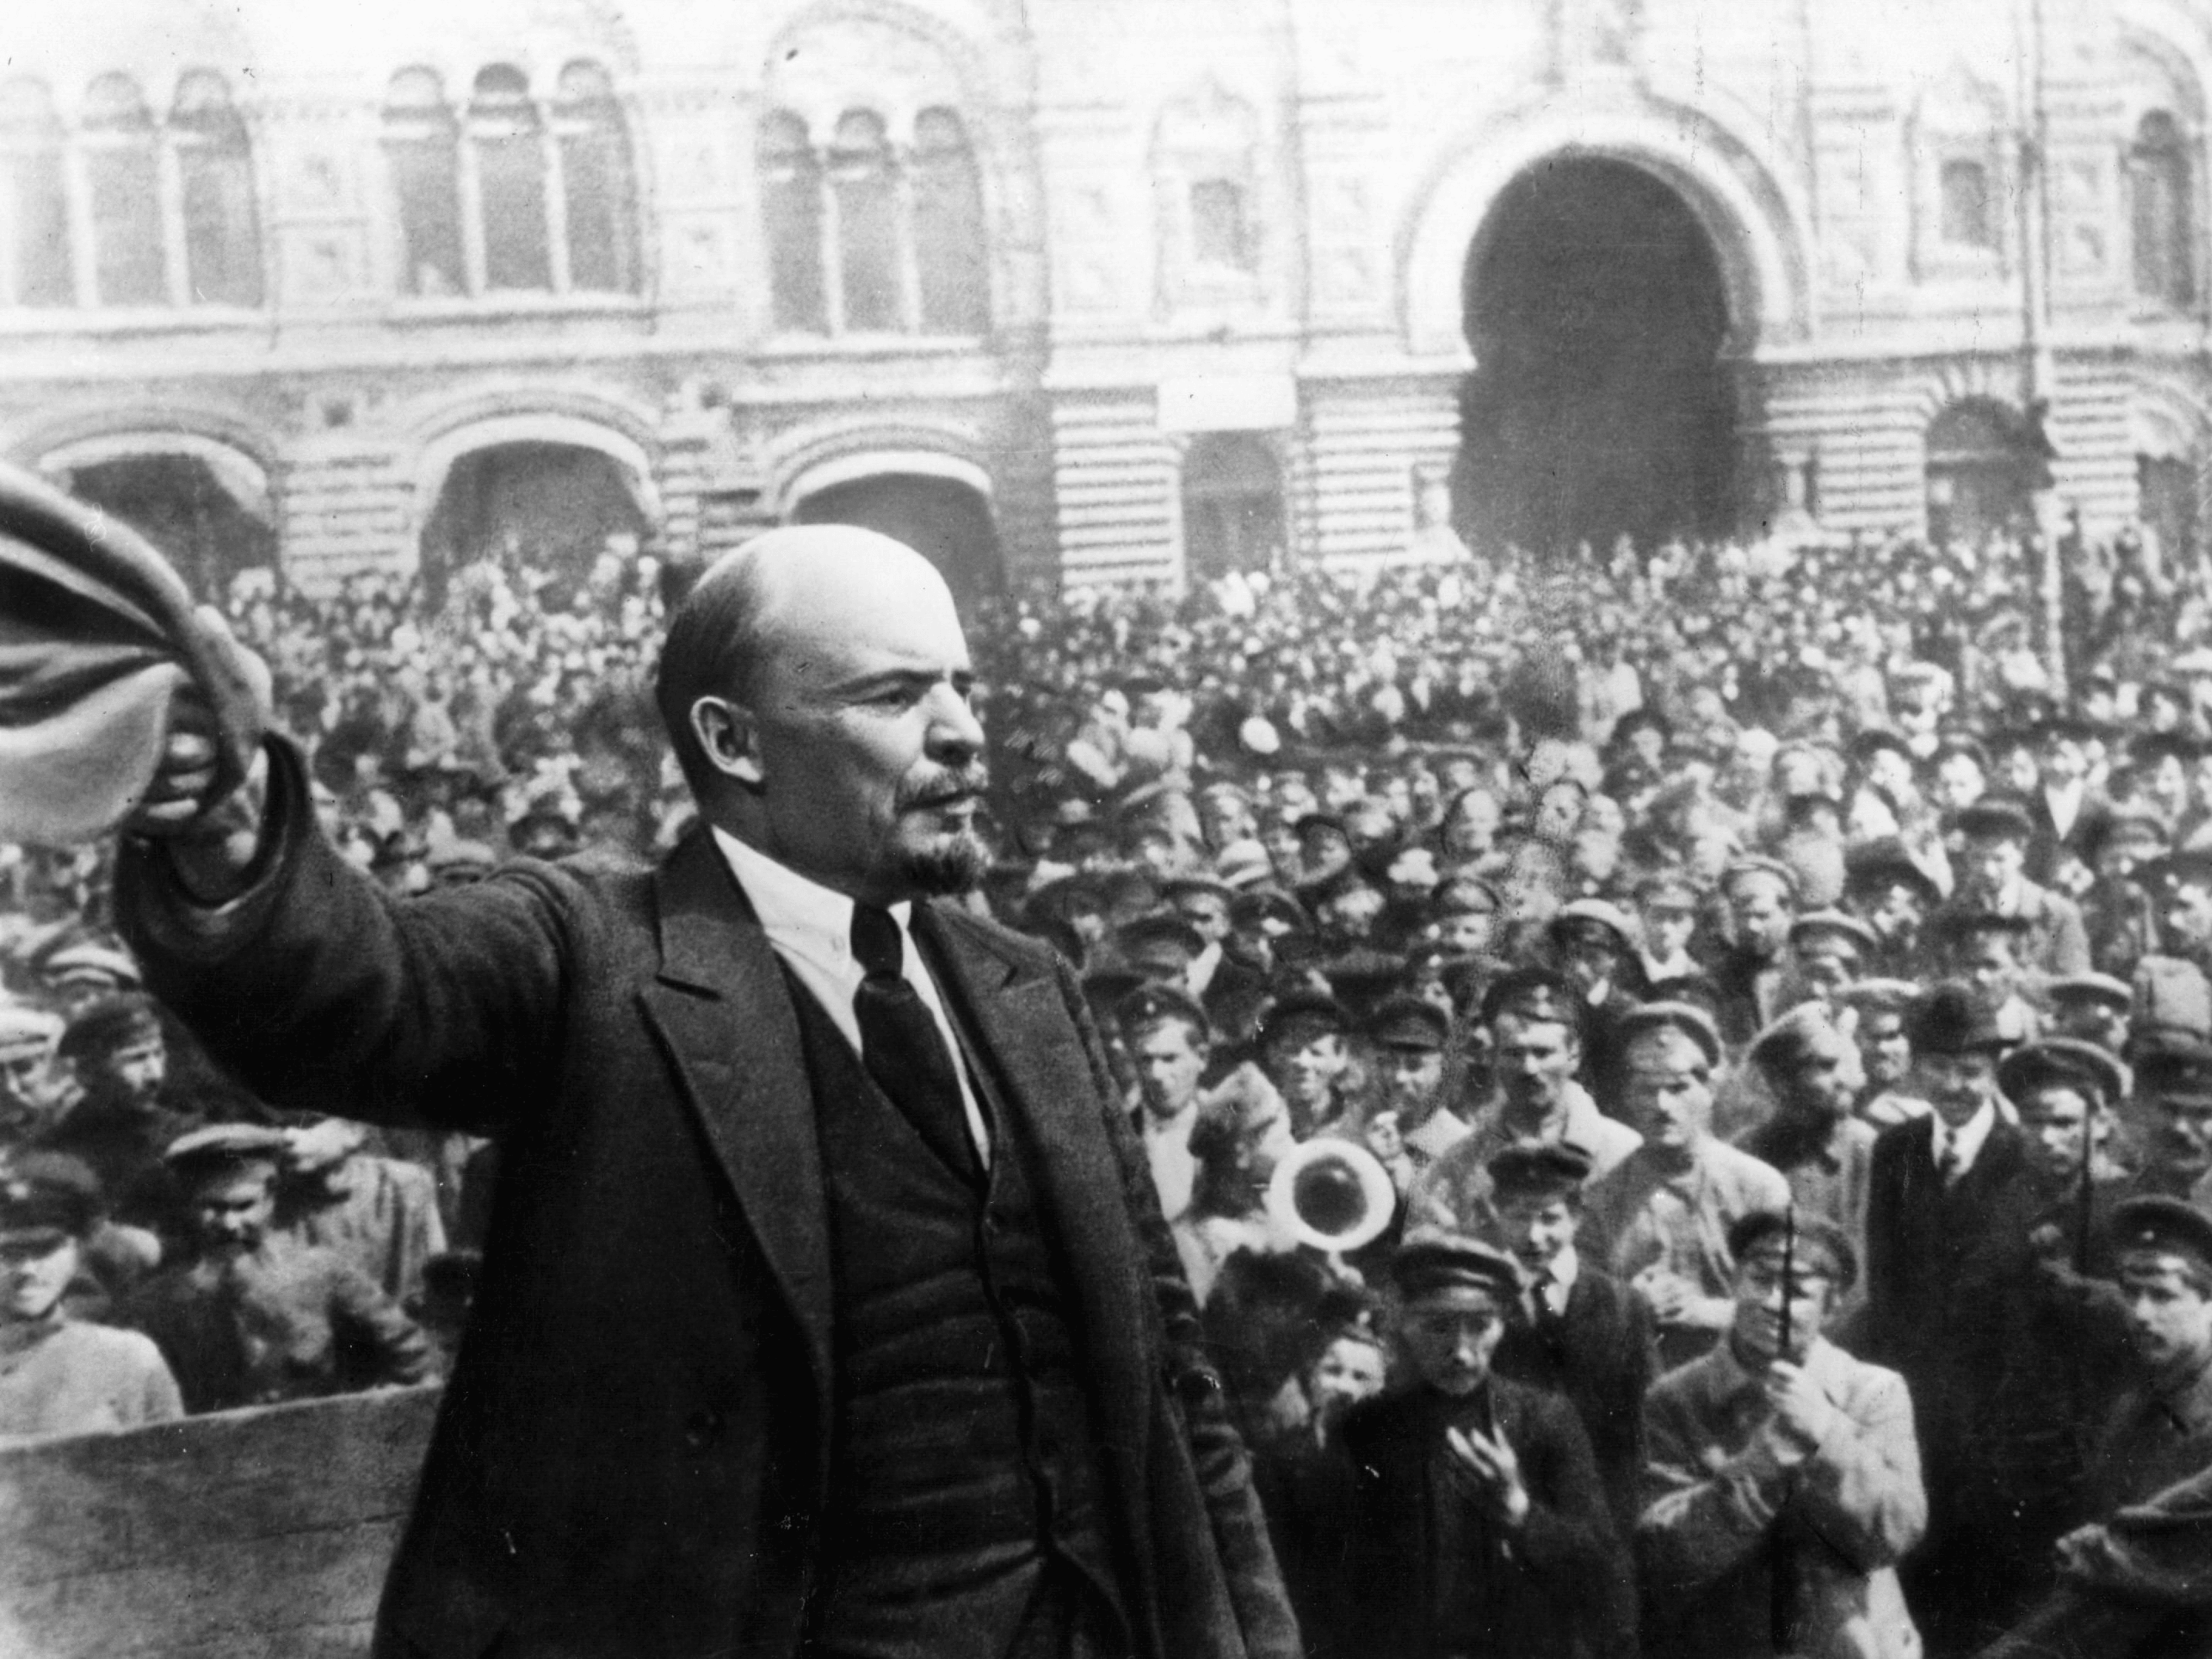 Russian communist revolutionary leader, Vladimir Lenin (1879 - 1924), giving a speech to Vsevobuch servicemen on the first anniversary of the foundation of the Soviet armed forces, Red Square, Moscow, 25th May 1919. Original Publication: People Disc - HG0194 (Photo by Keystone/Getty Images)